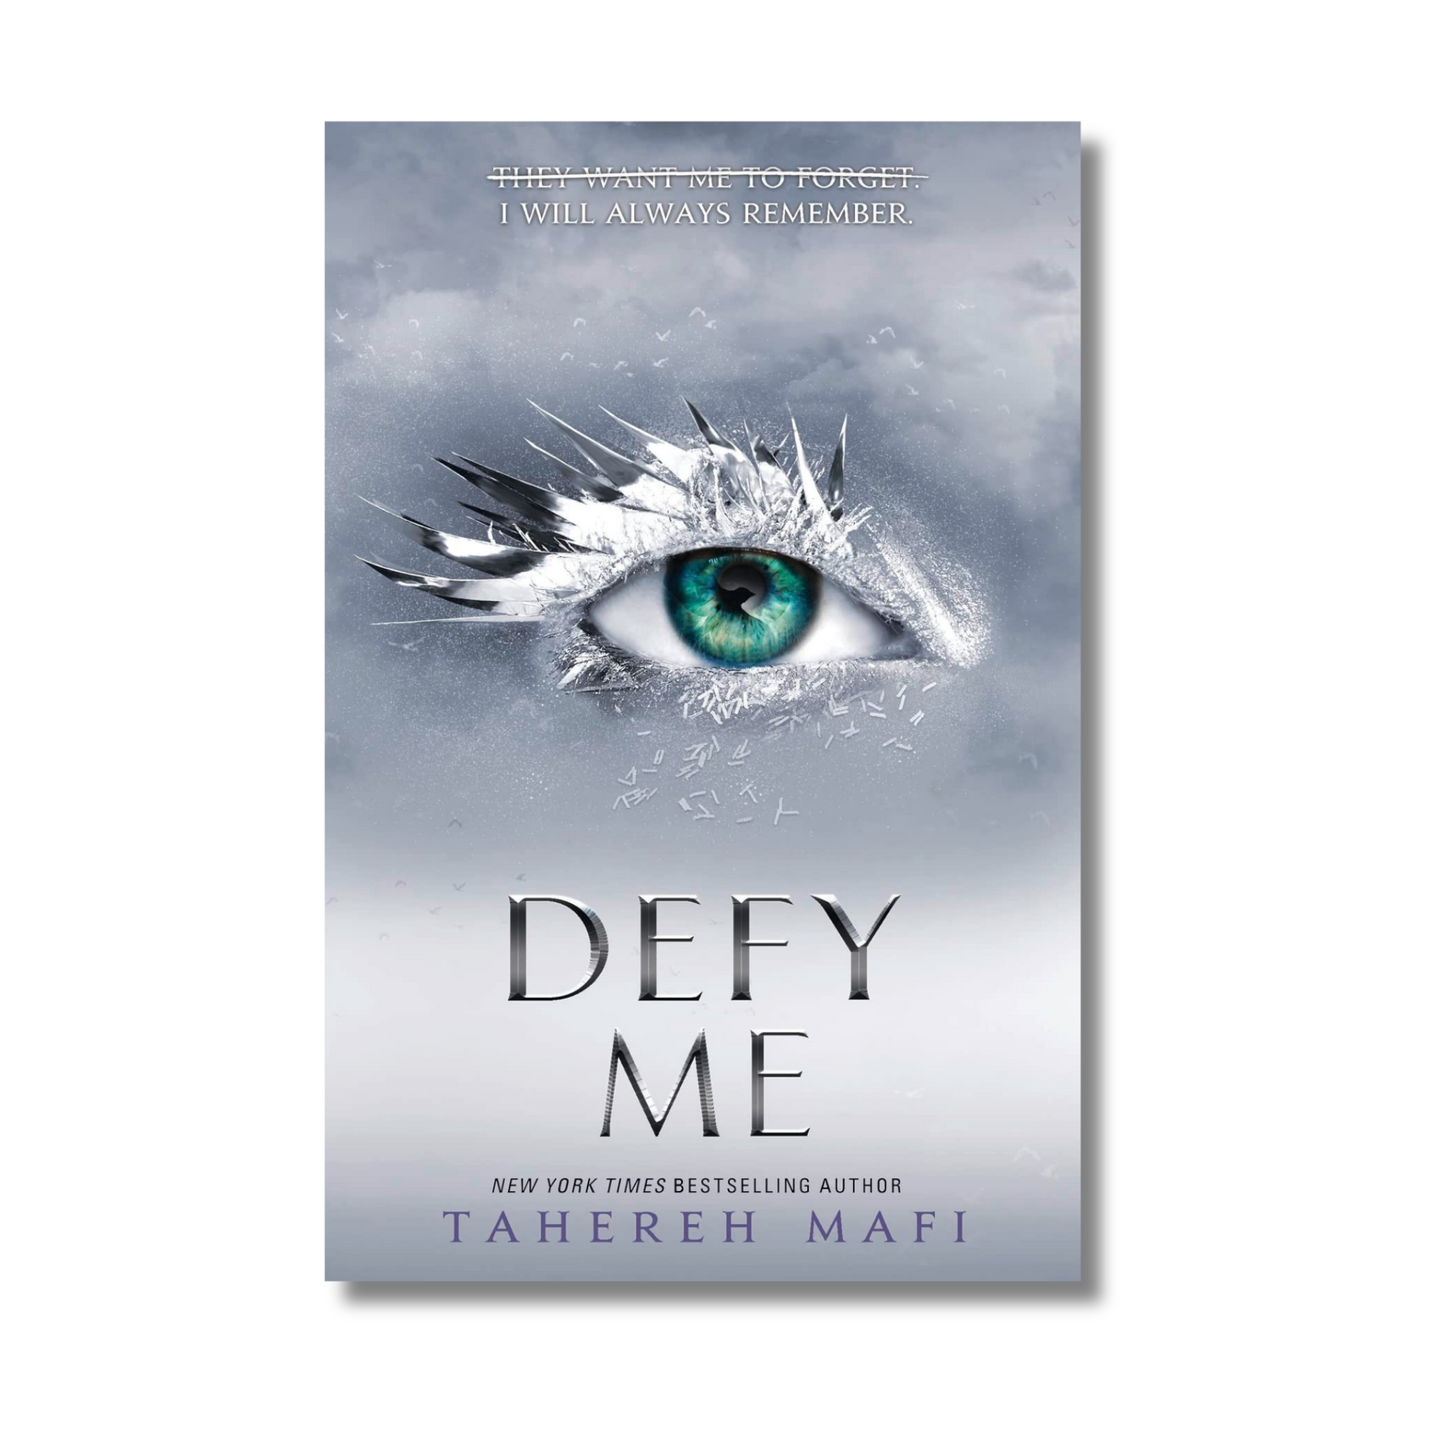 Defy Me By Tahereh Mafi (Paperback)